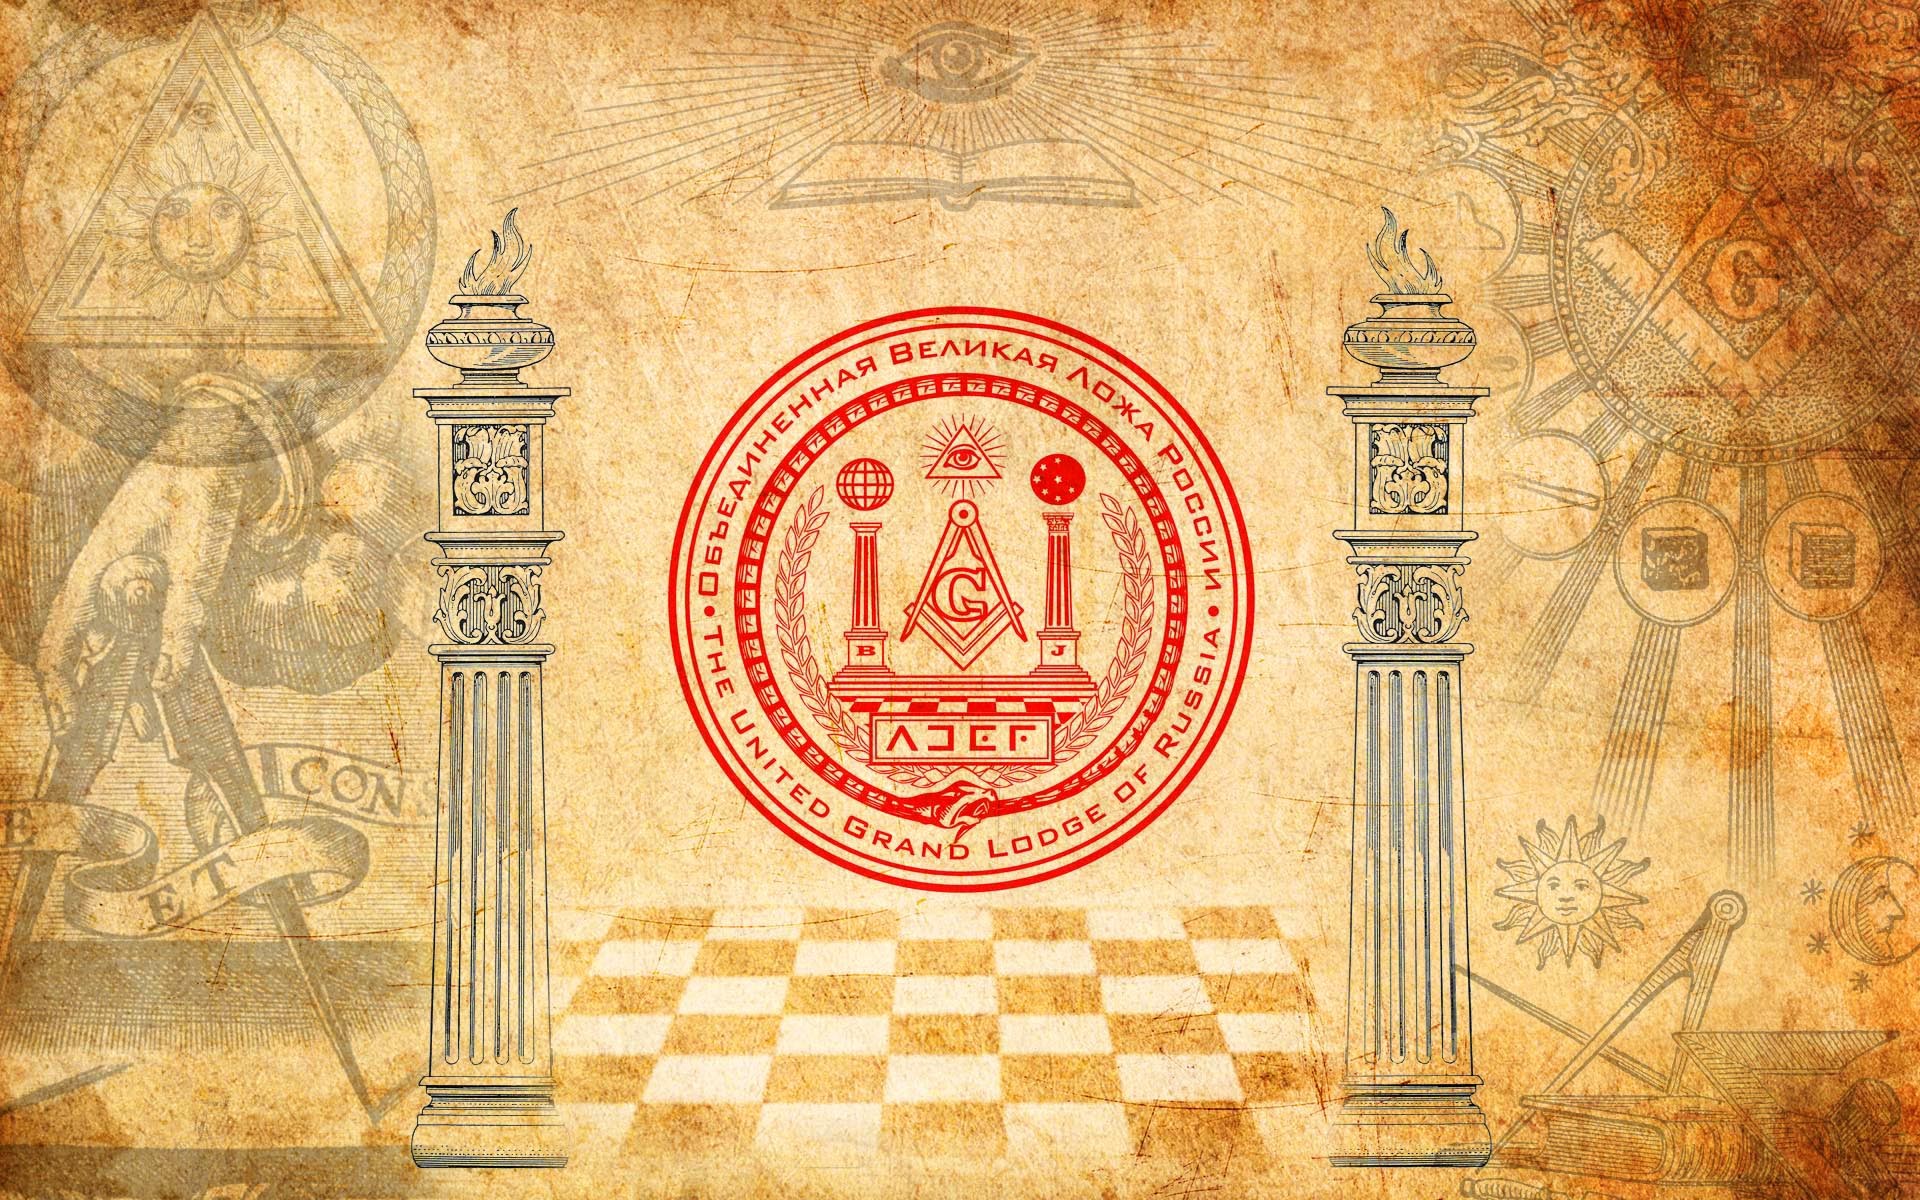 Lodge of Russia Wallpapers Grand Lodge of Russia Myspace Backgrounds